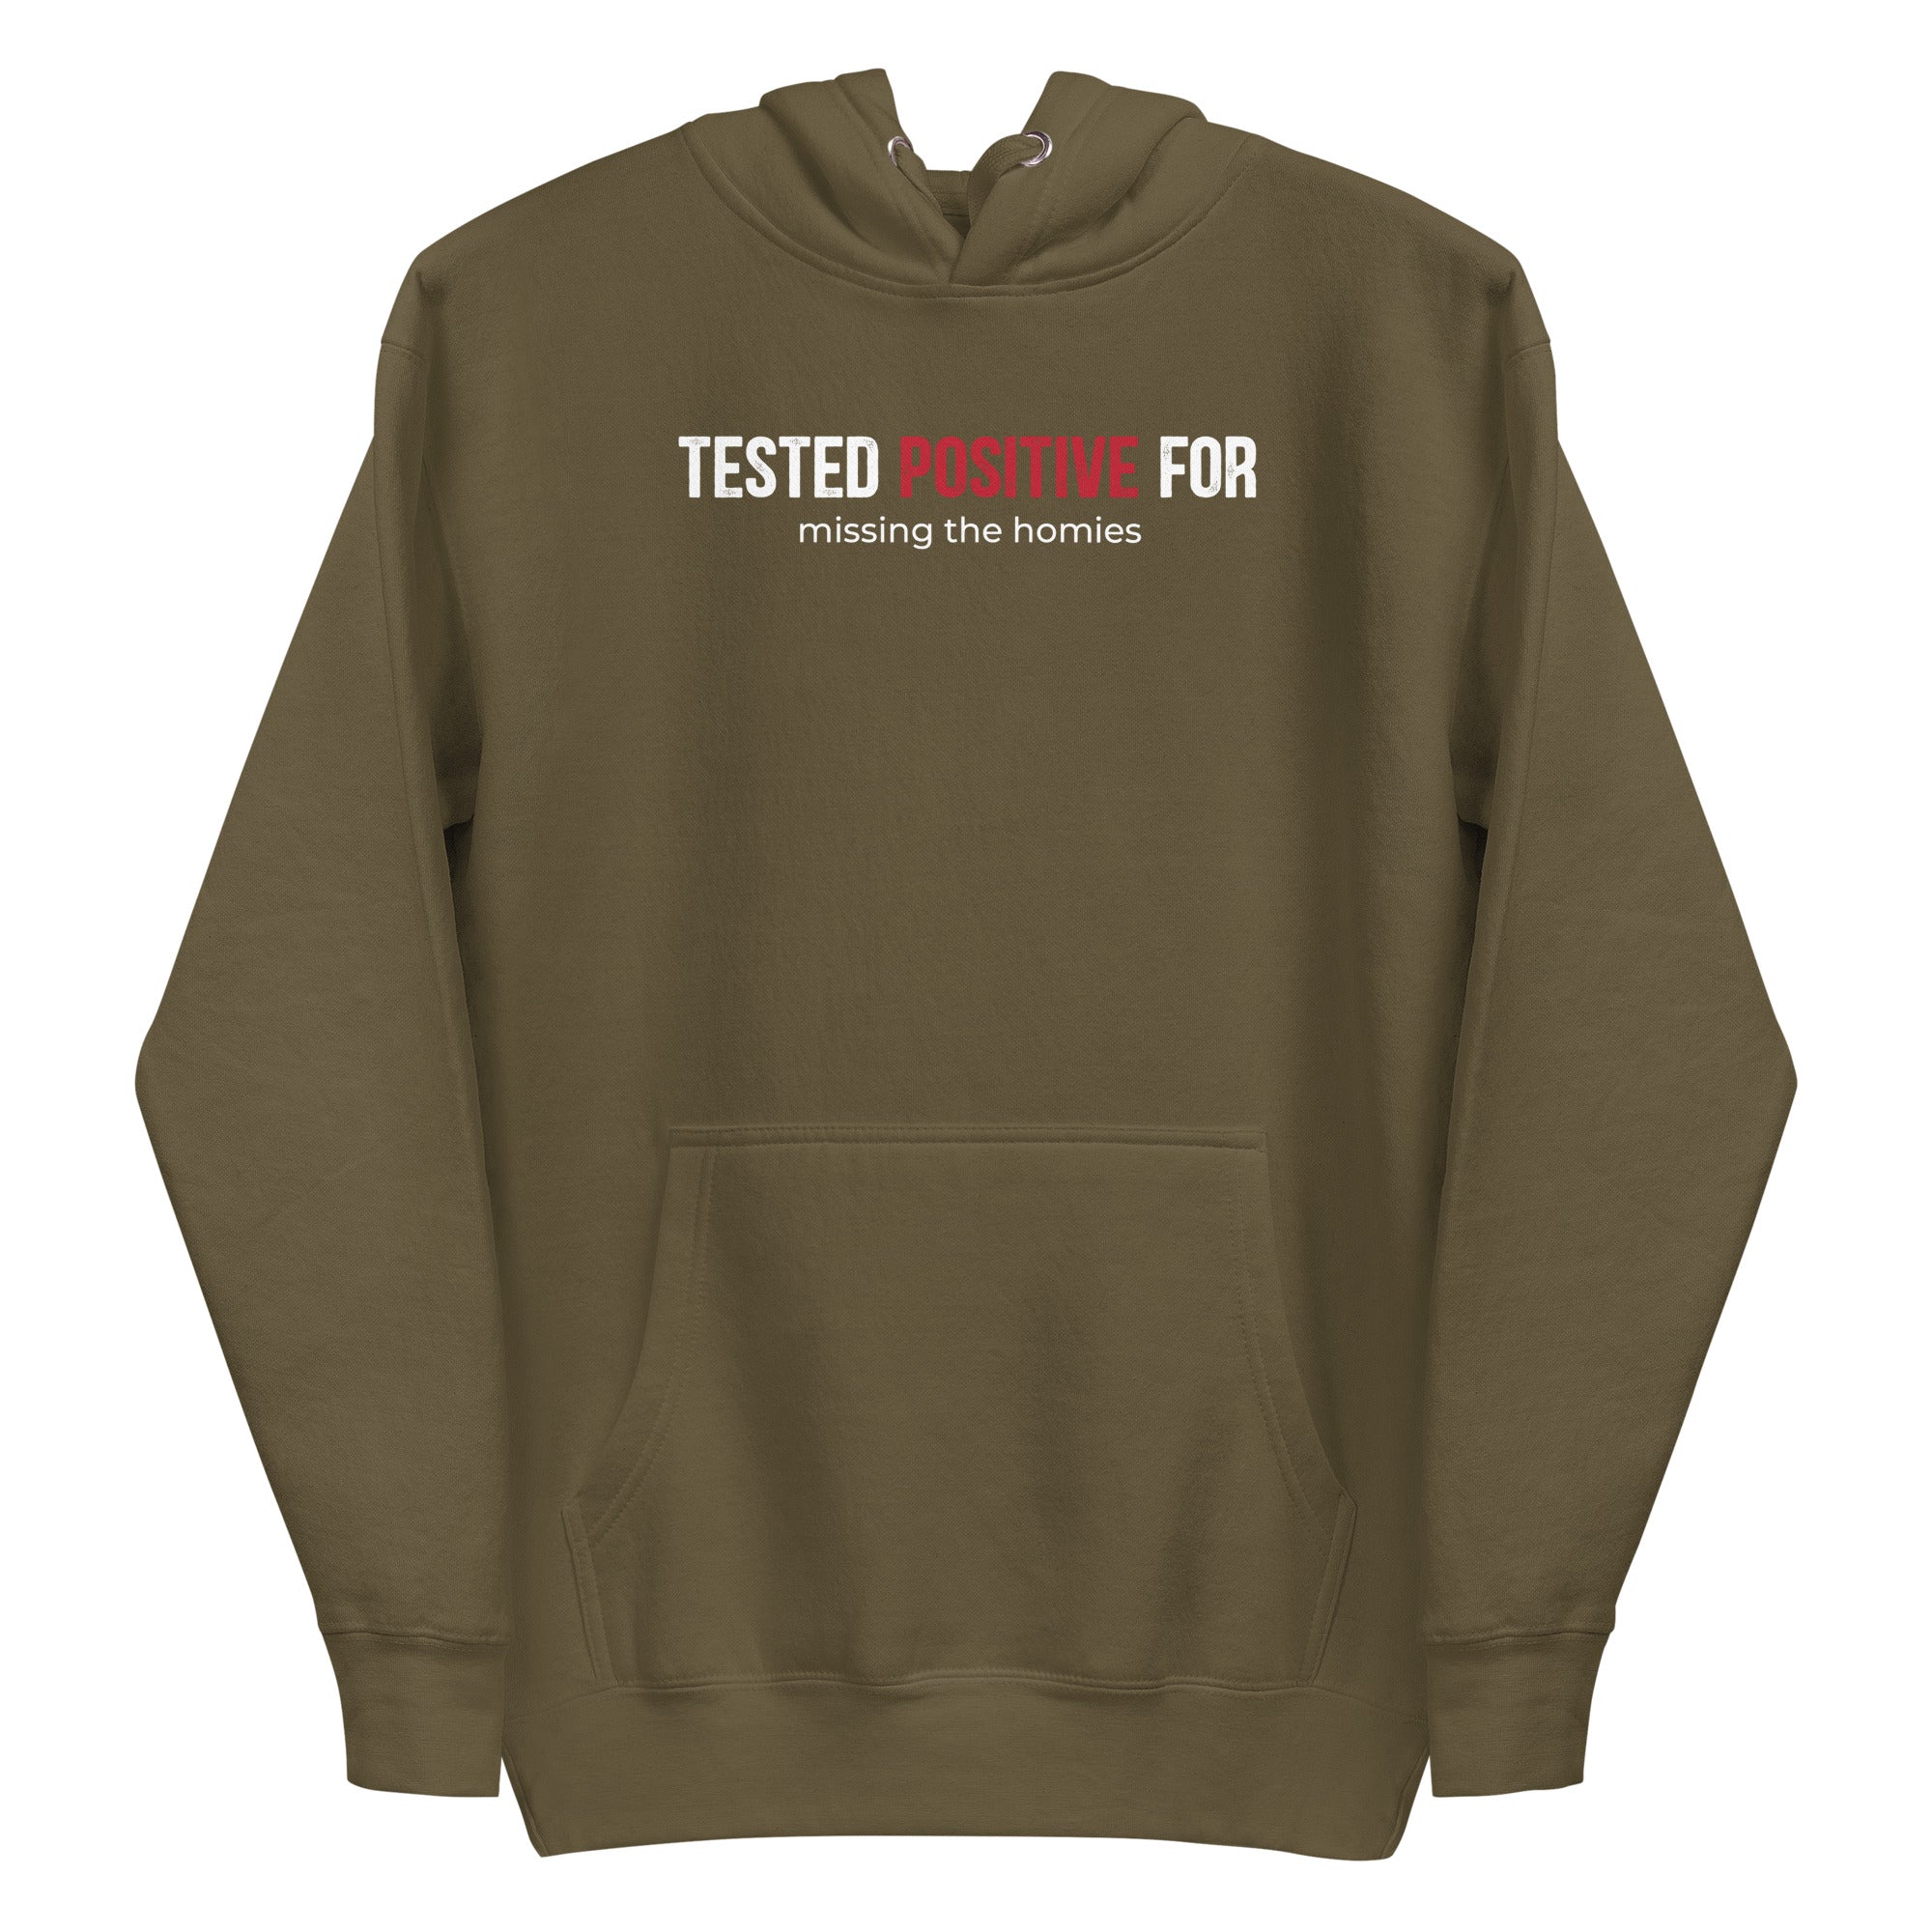 Mike Sorrentino Tested Positive Hoodie